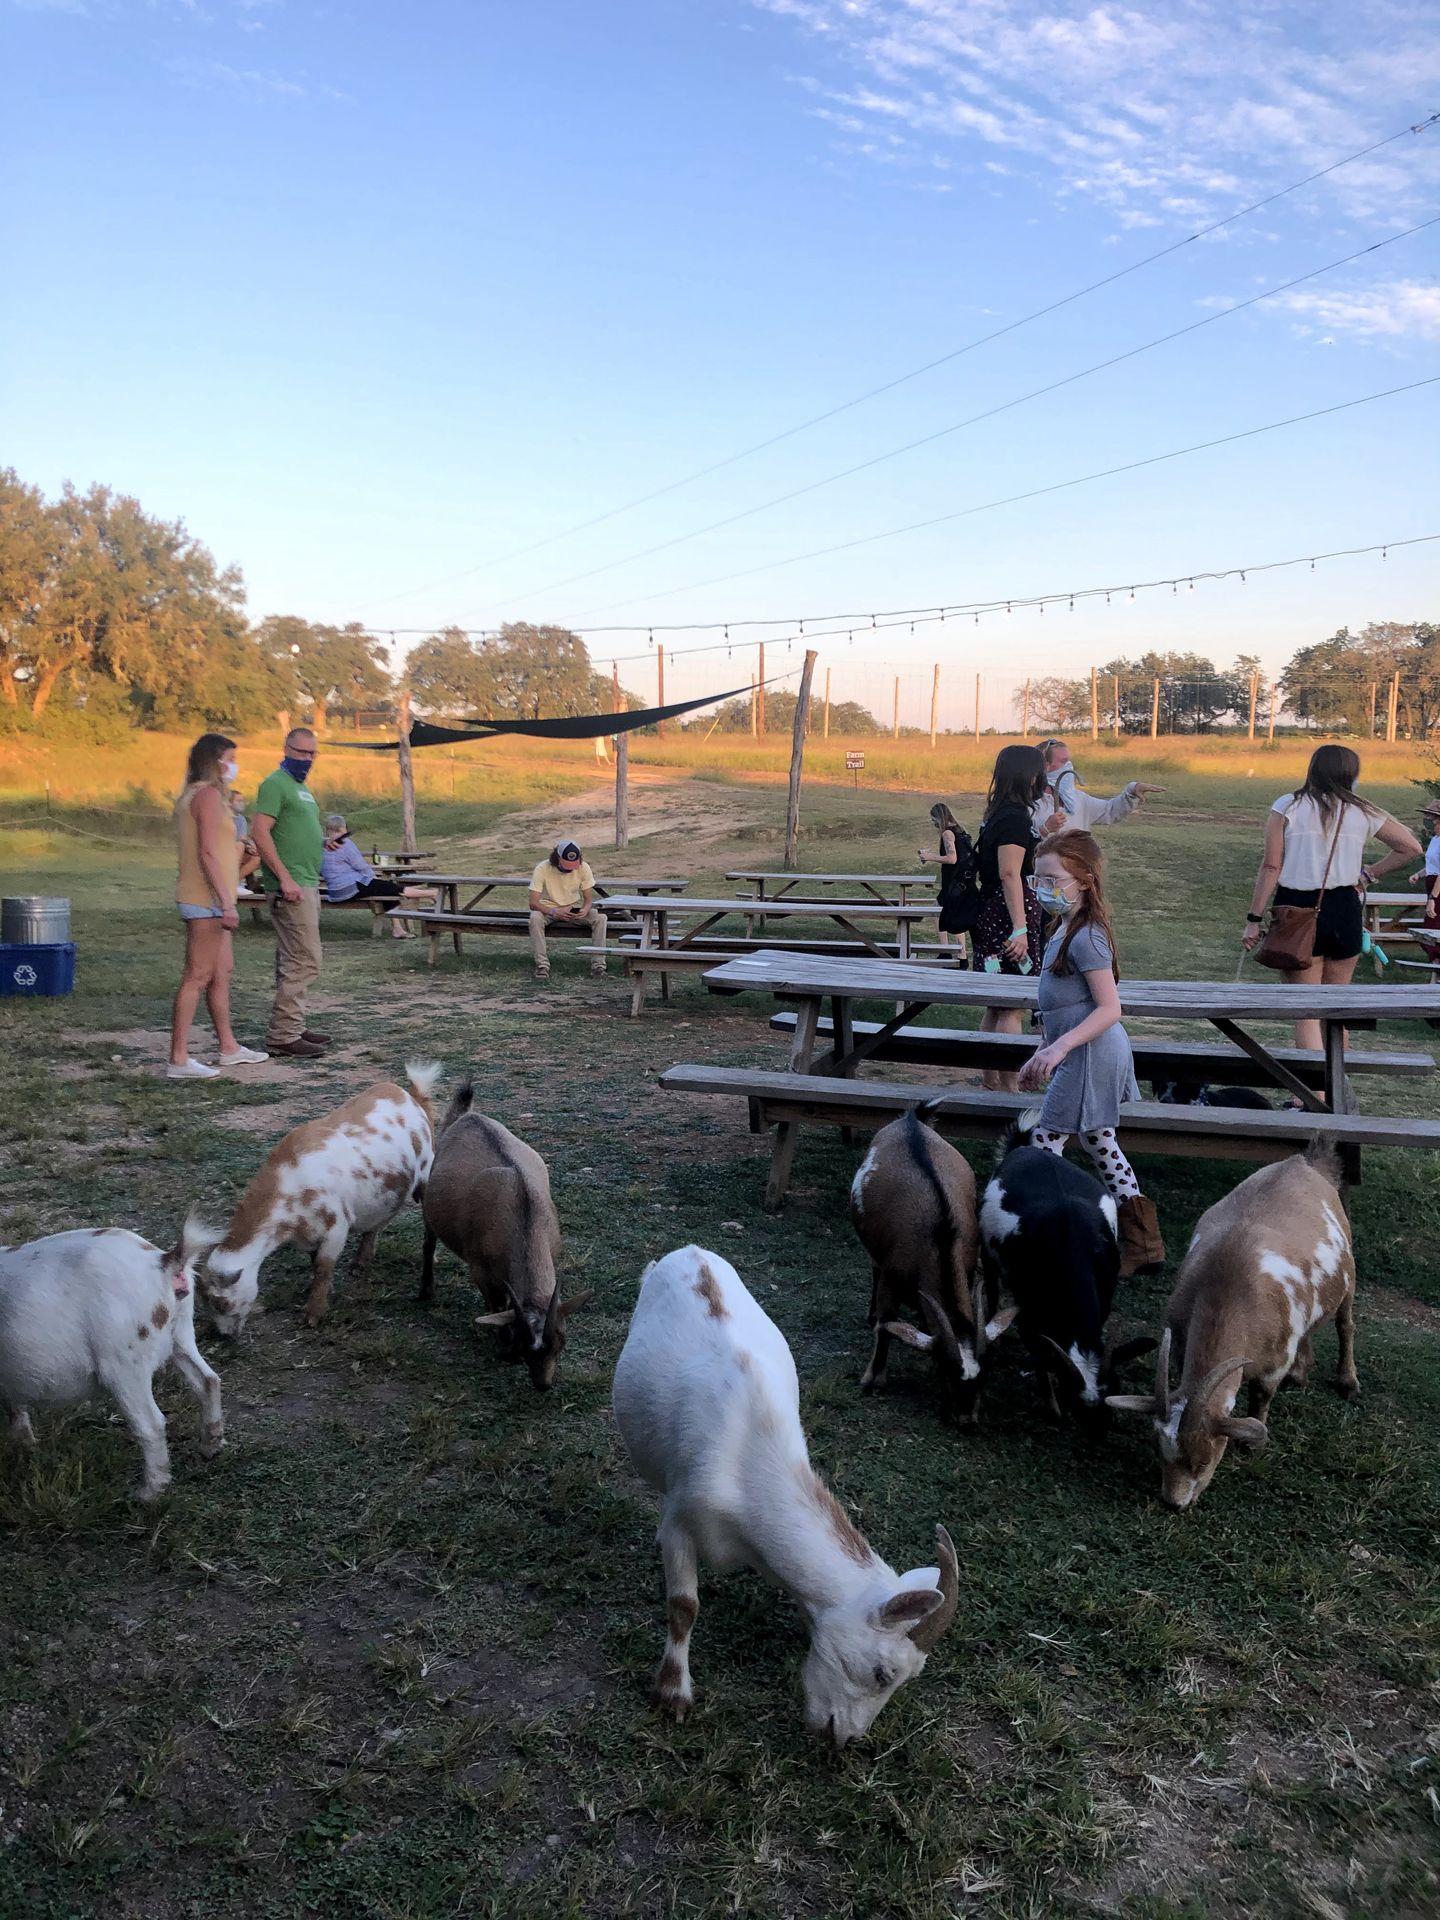 A group of goats near sunset at Jester King Brewery.